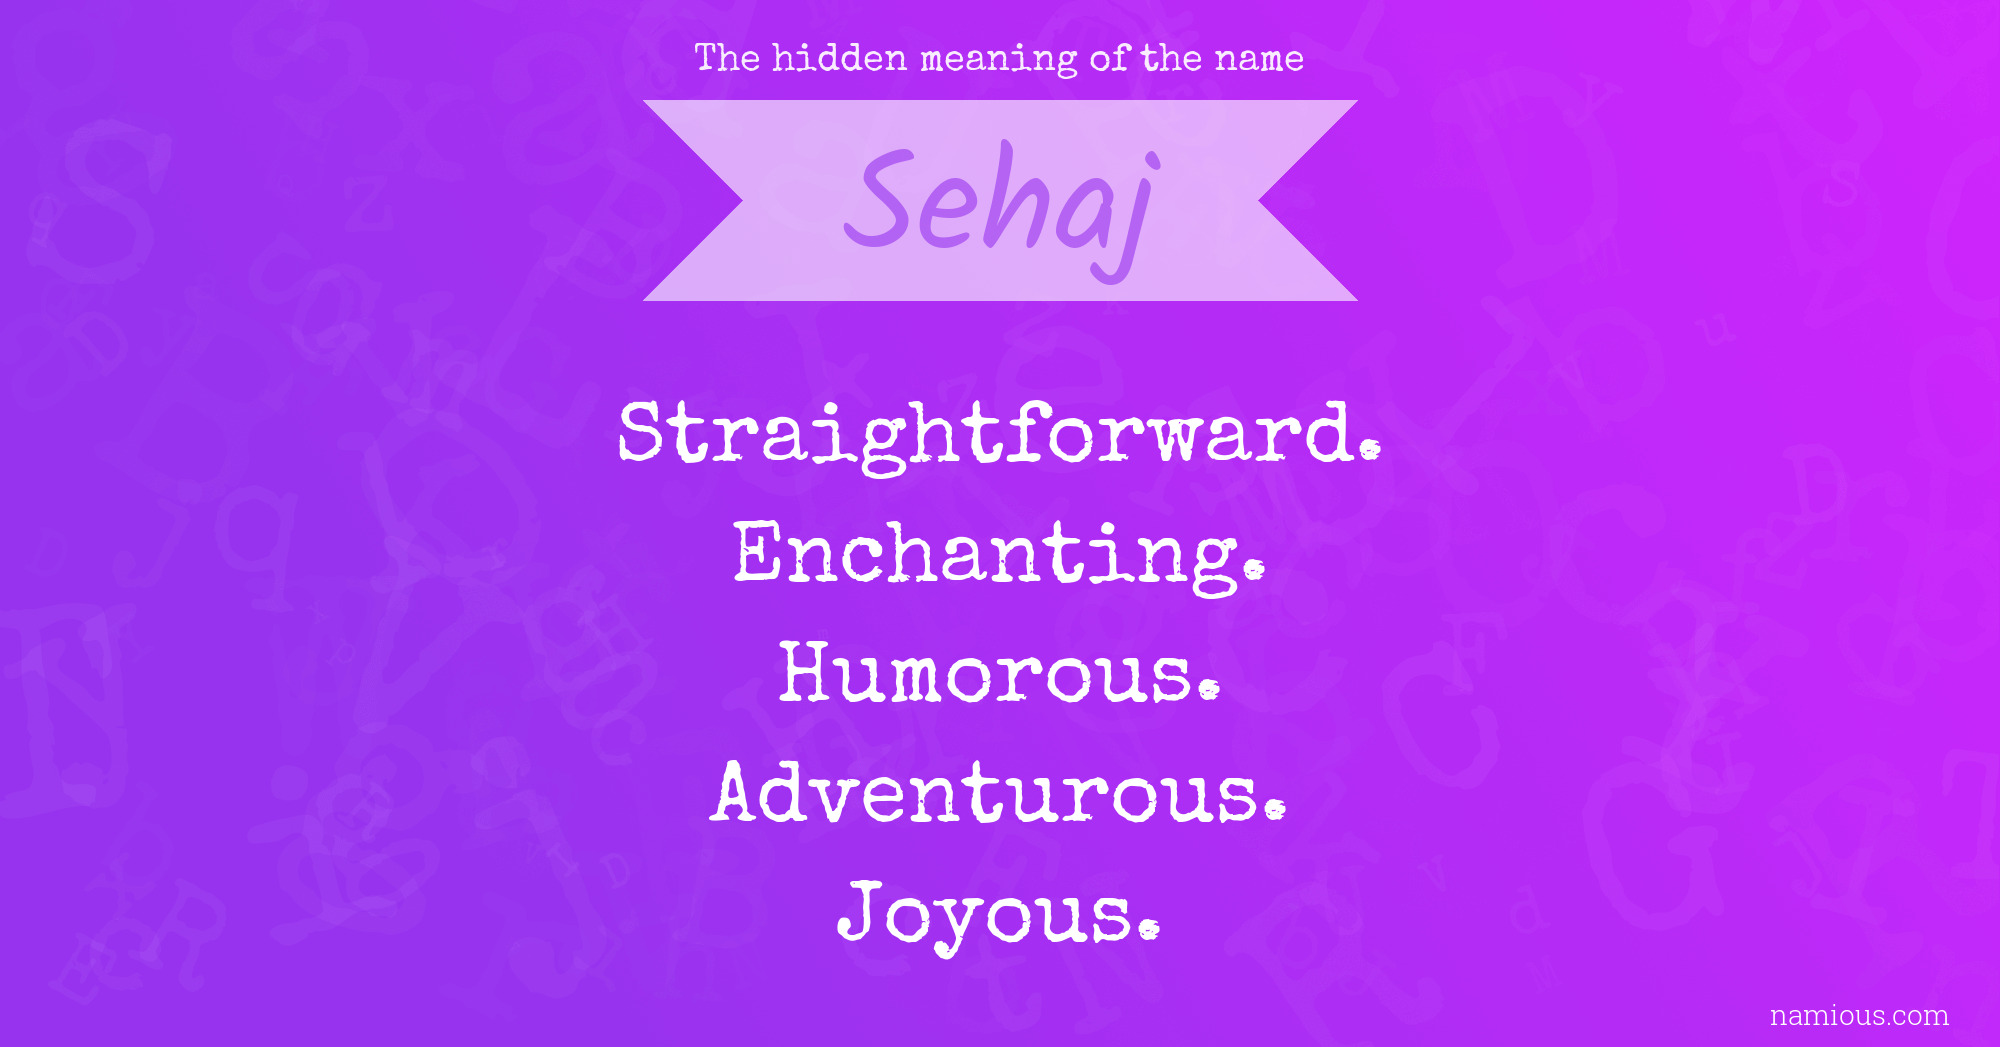 The hidden meaning of the name Sehaj